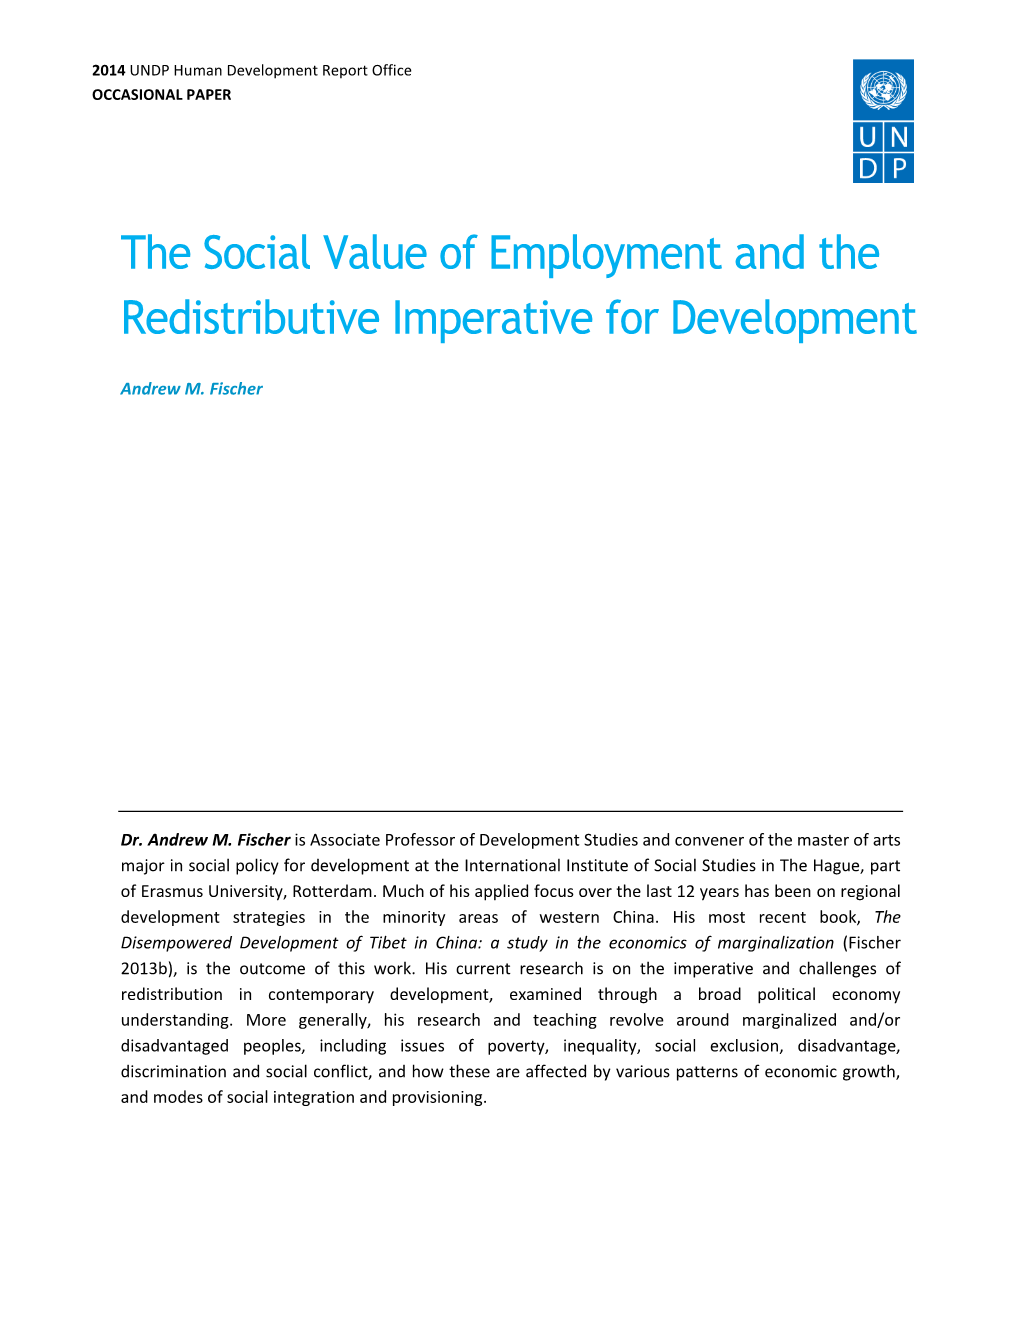 The Social Value of Employment and the Redistributive Imperative for Development